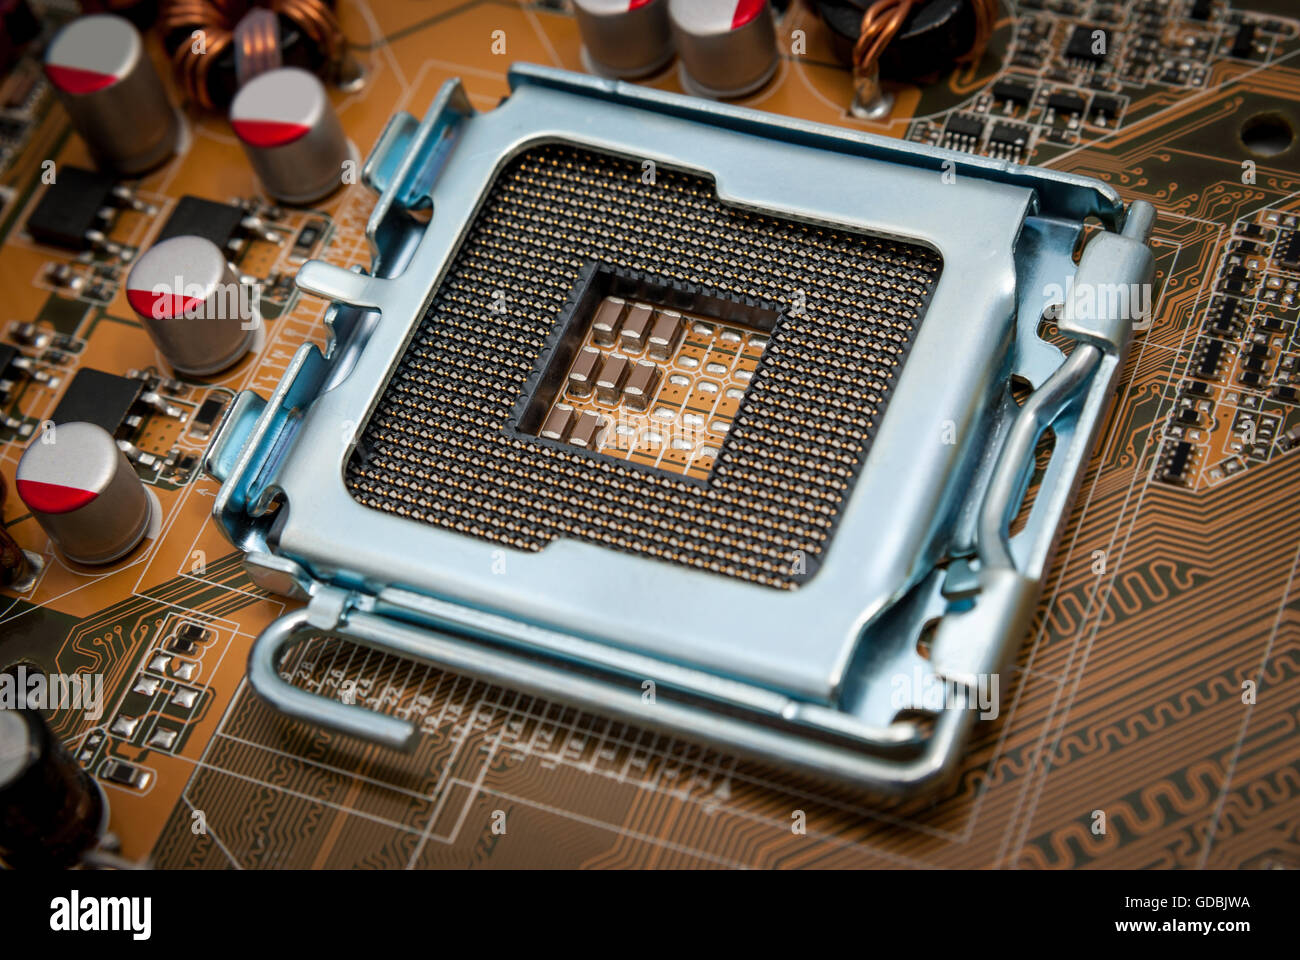 Empty CPU processor socket with pins on motherboard Stock Photo - Alamy